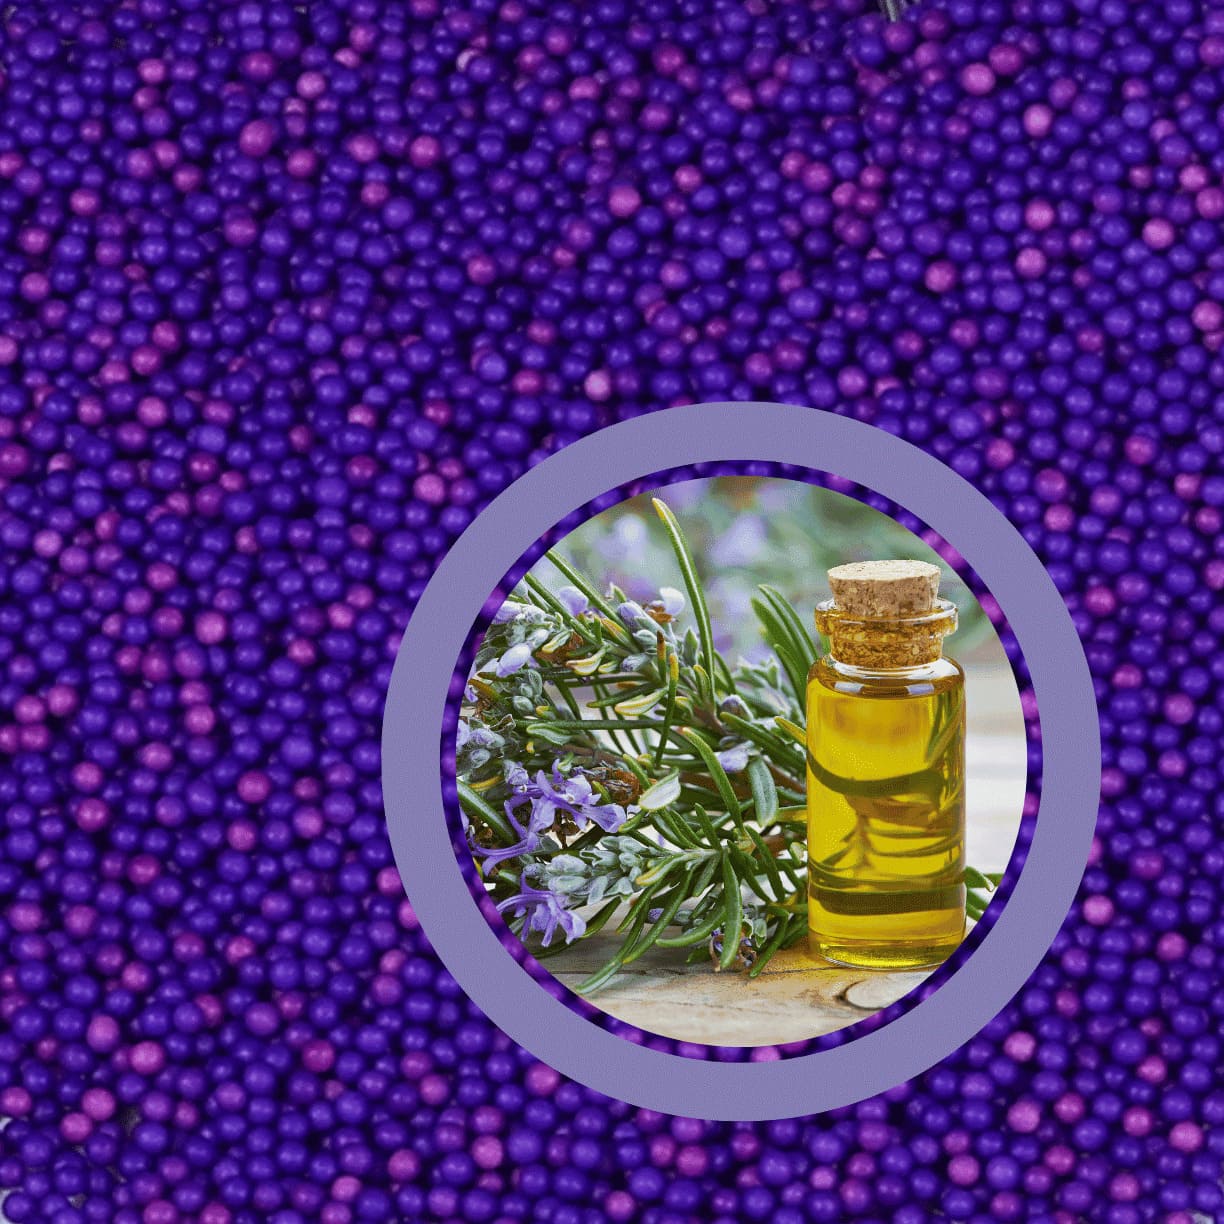 Encapsulated-Rosemary-Extract-Beads